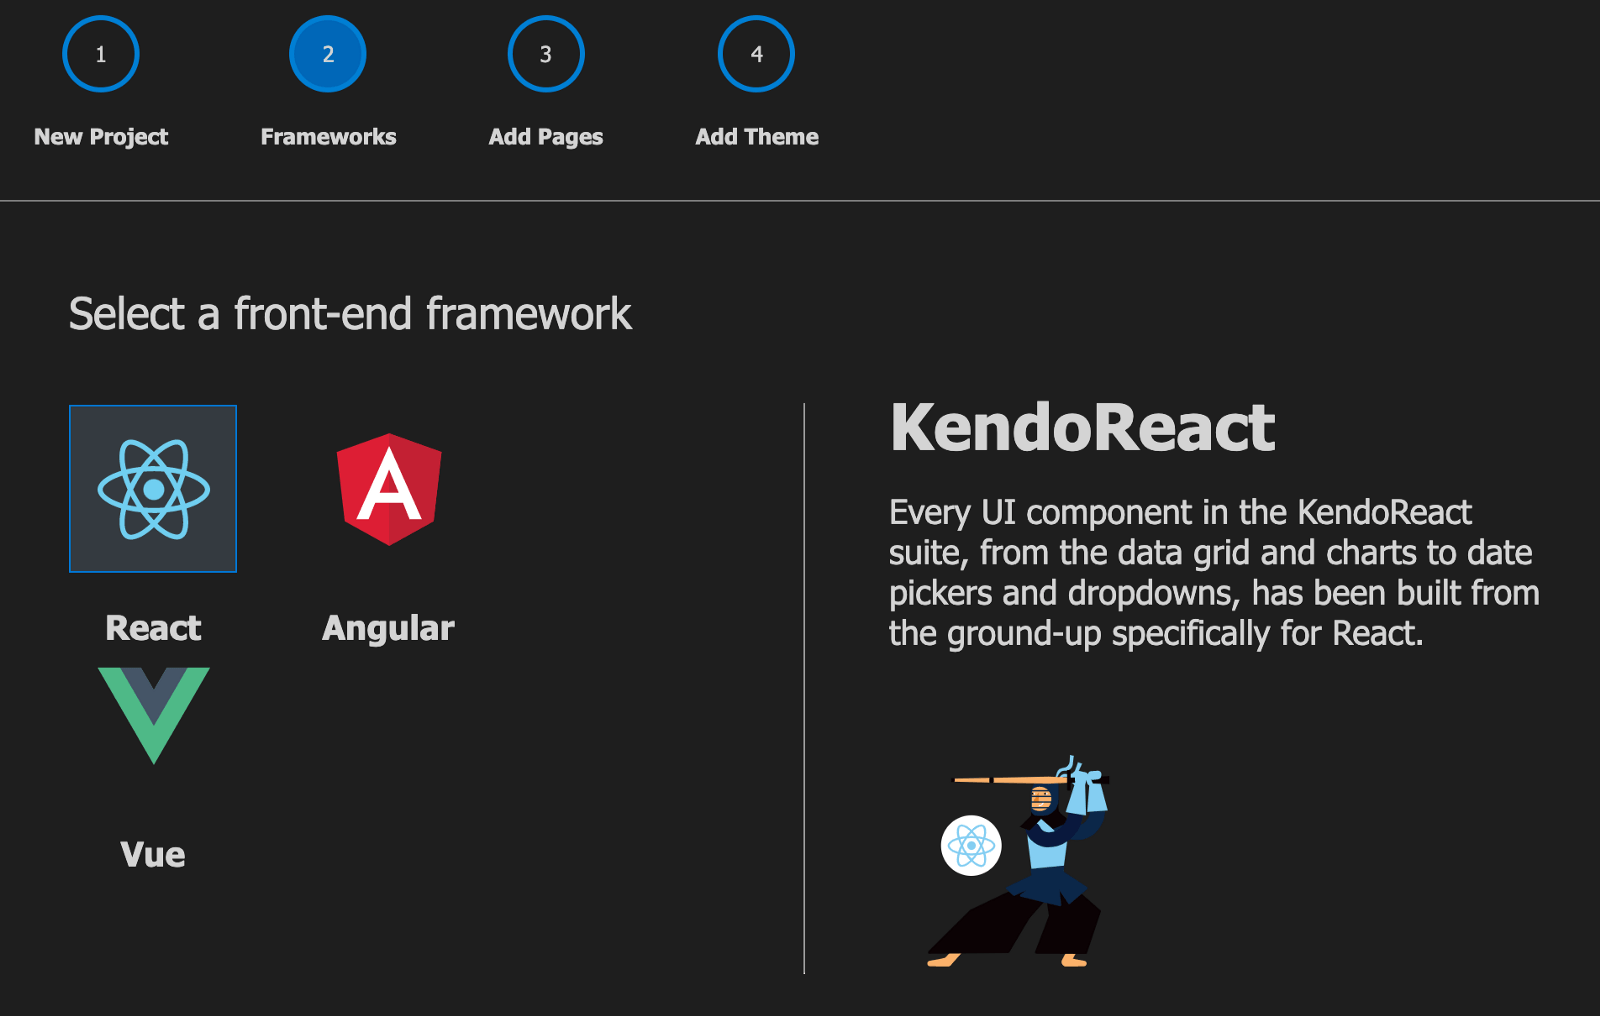 Step 2: Frameworks. Select a front-end framework, with options for React, Angular and Vue. React is highlighted.